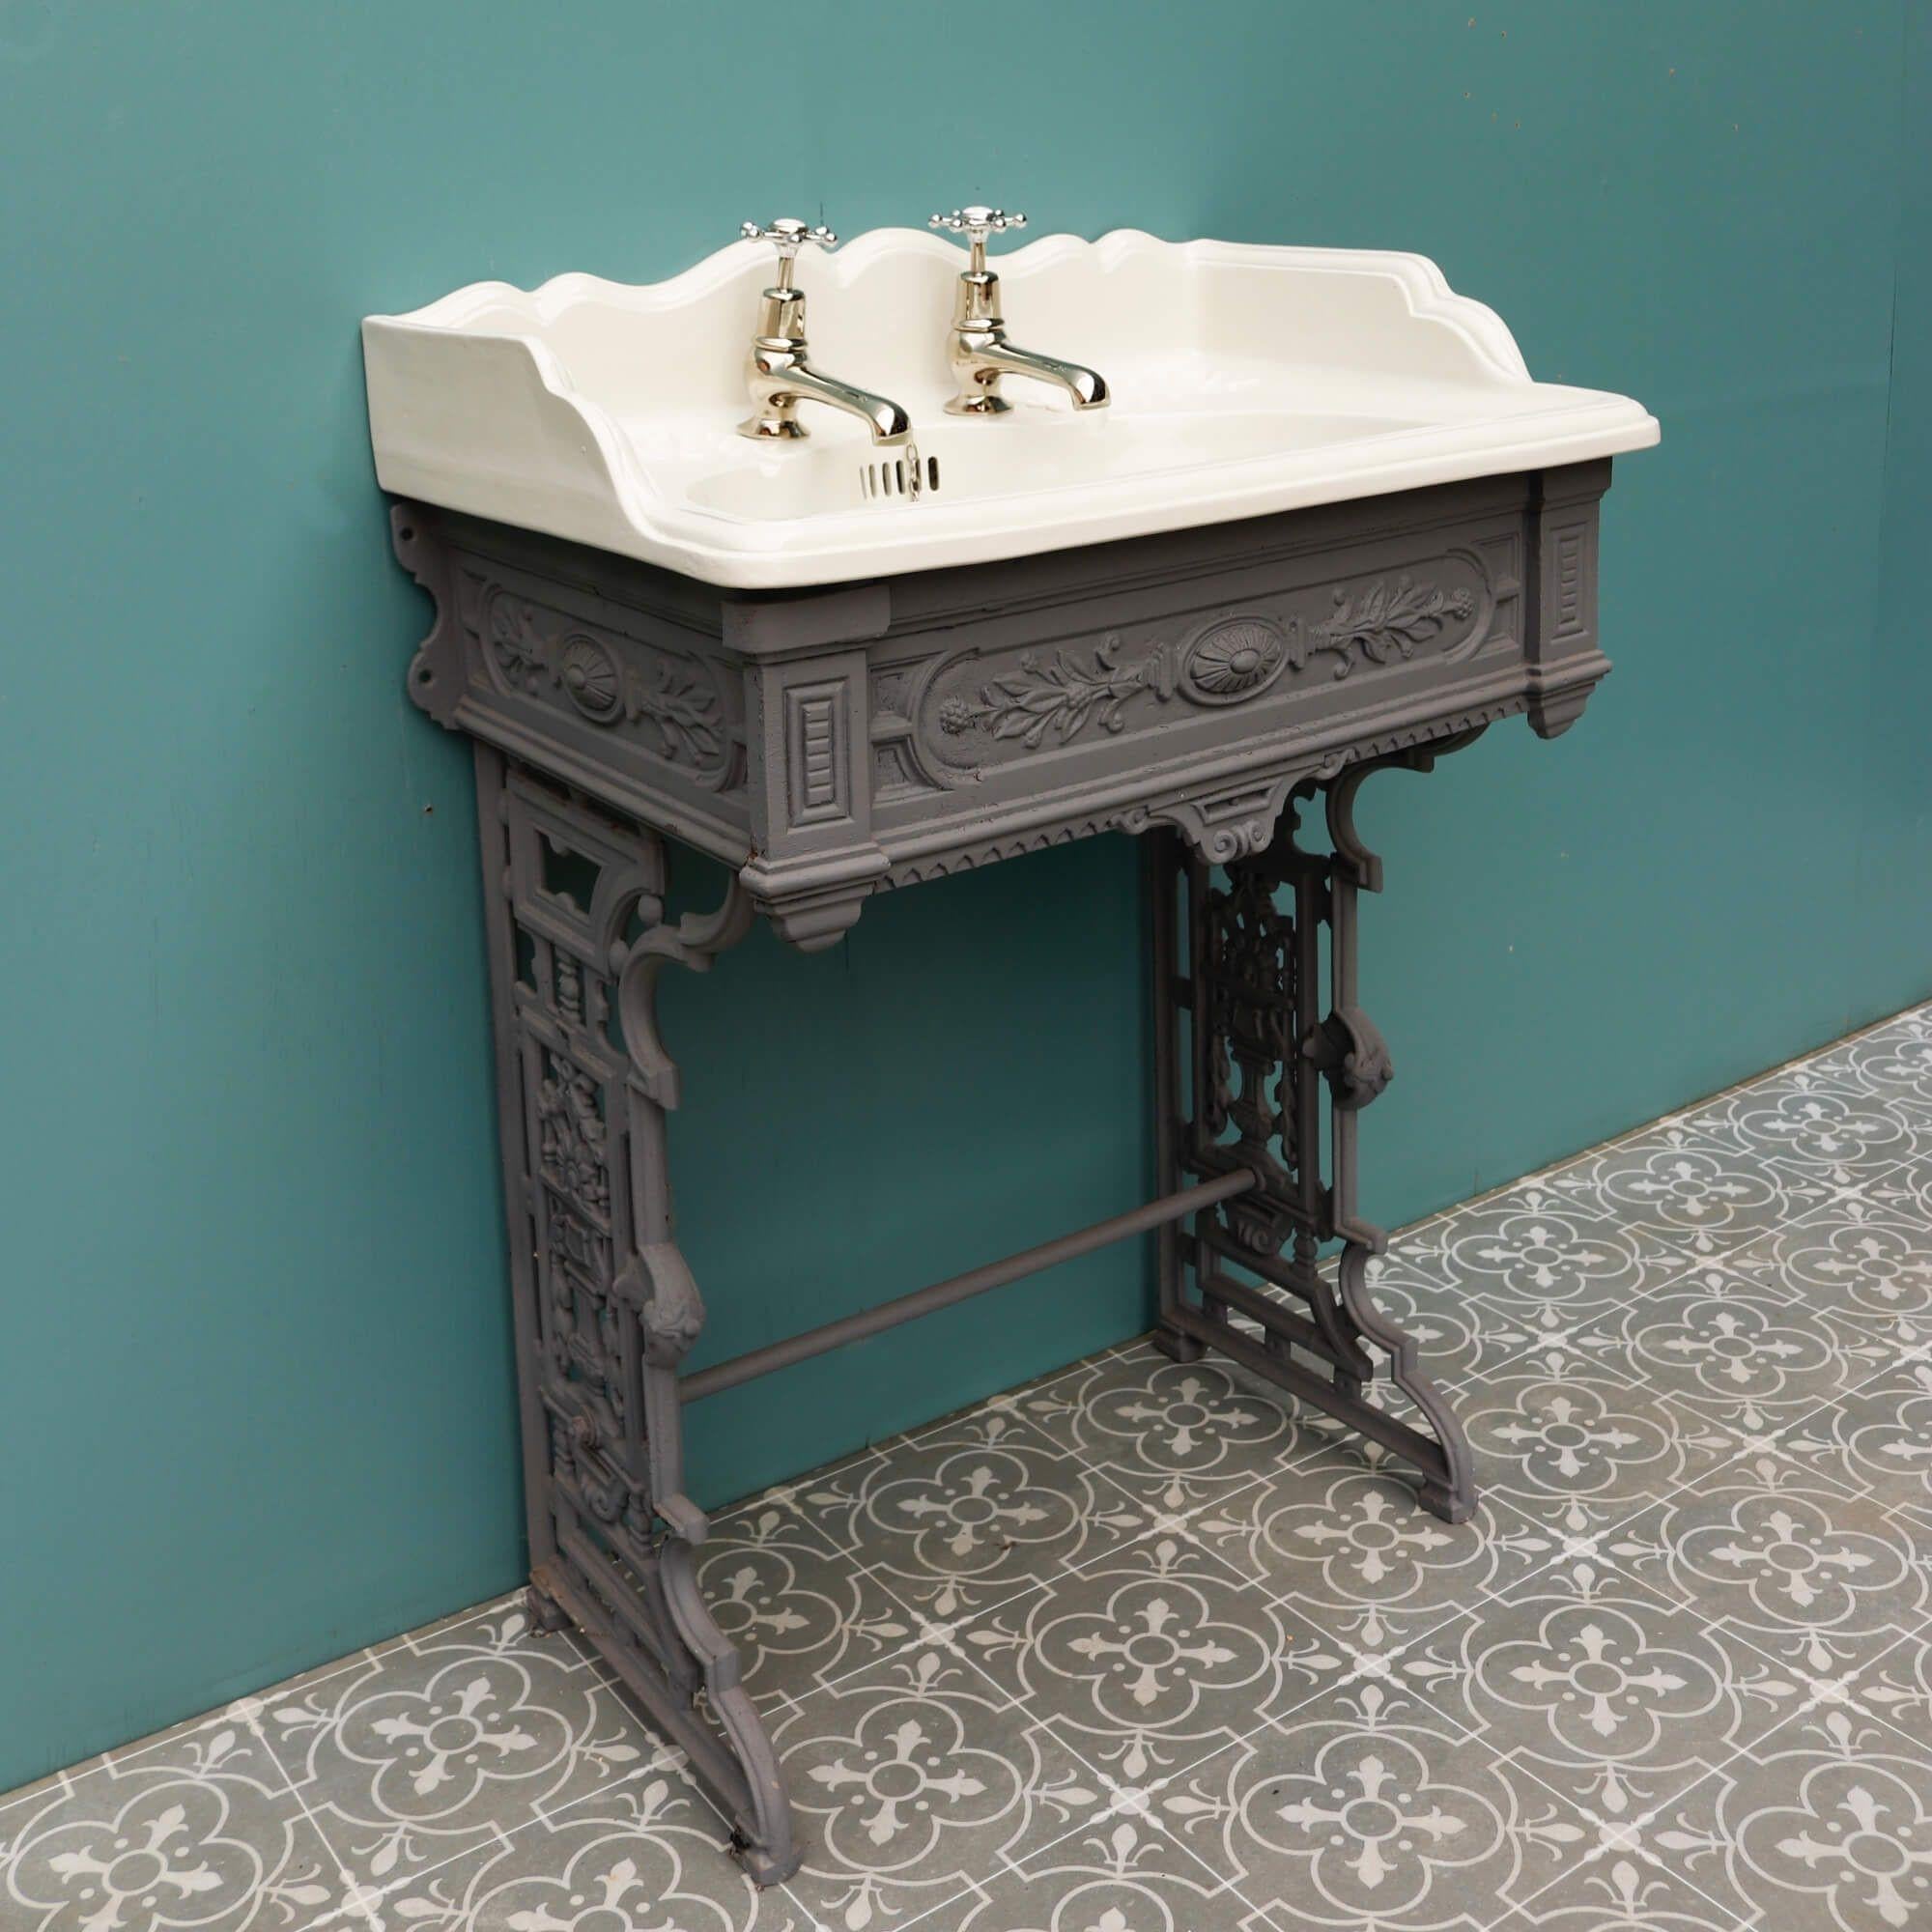 Metal Antique Porcelain Sink Basin with Cast Iron Stand For Sale